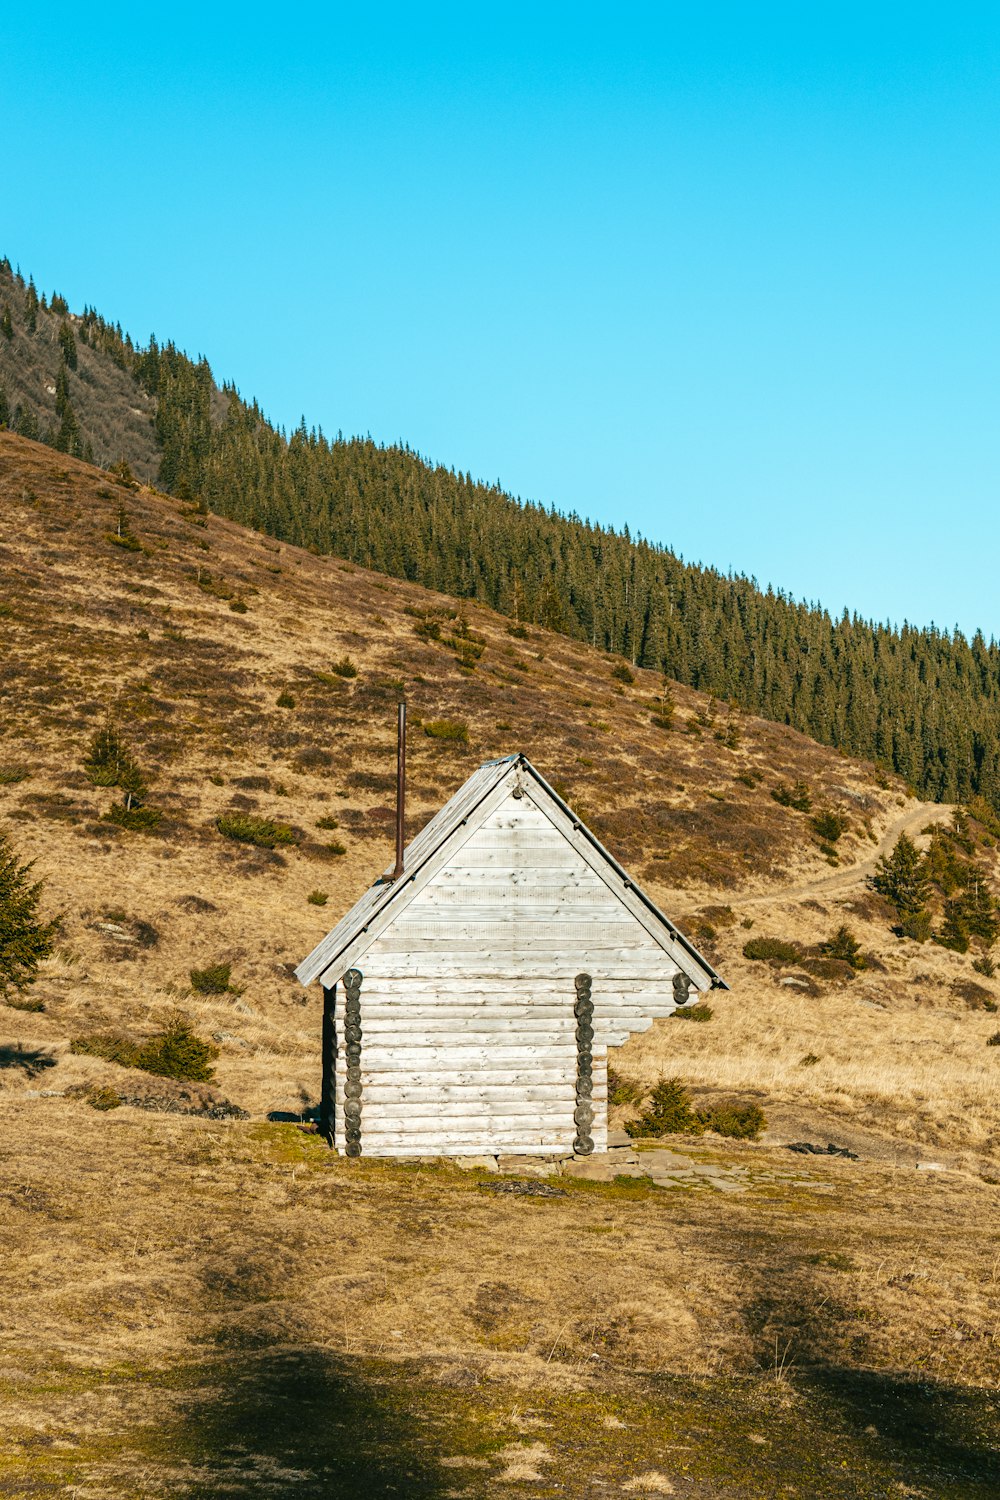 a small white building sitting in the middle of a field